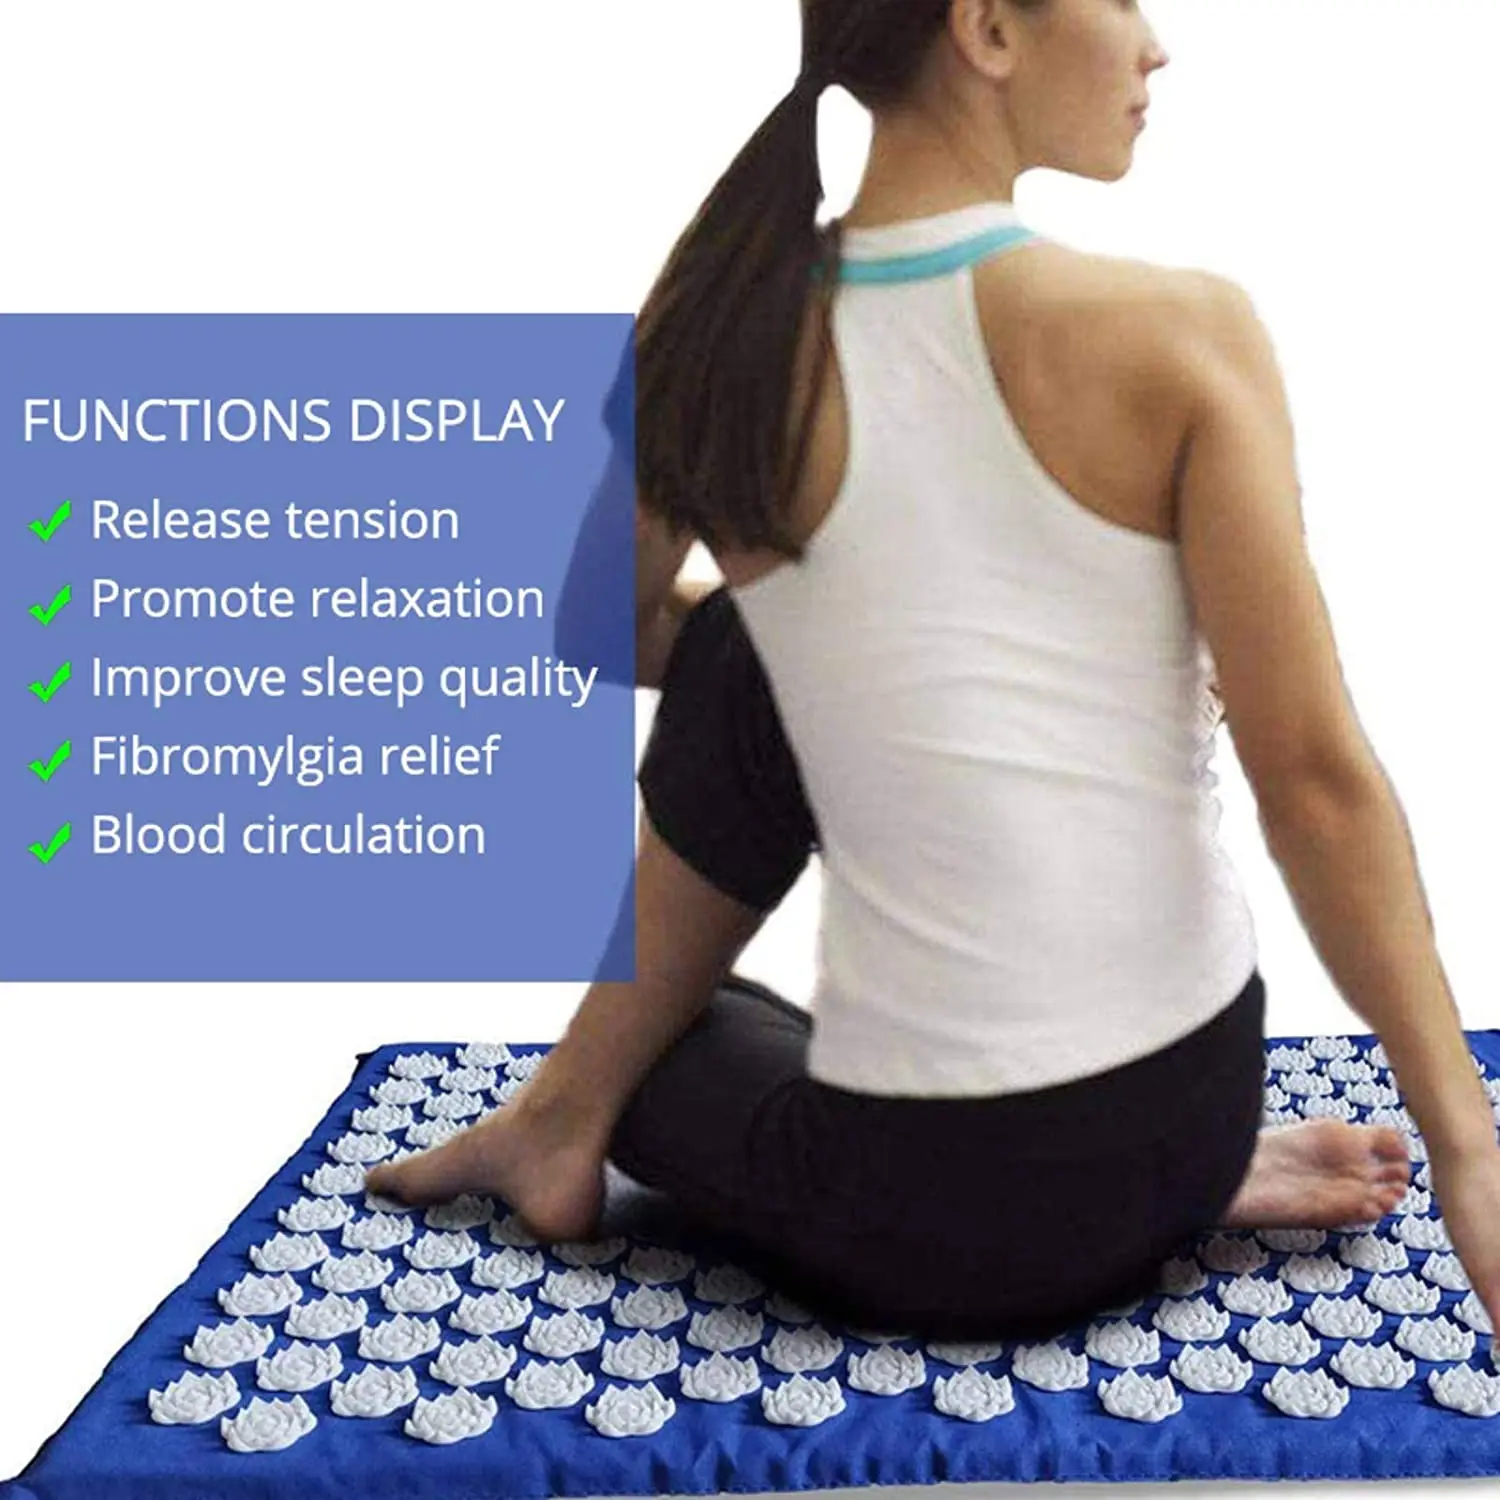 

Acupressure Mat Massage Yoga Mat Fitness Mat Relieve Stress Pain Spike Back Body Massage for Home Pad Acupuncture Set, Black,green,blue,purple,gray